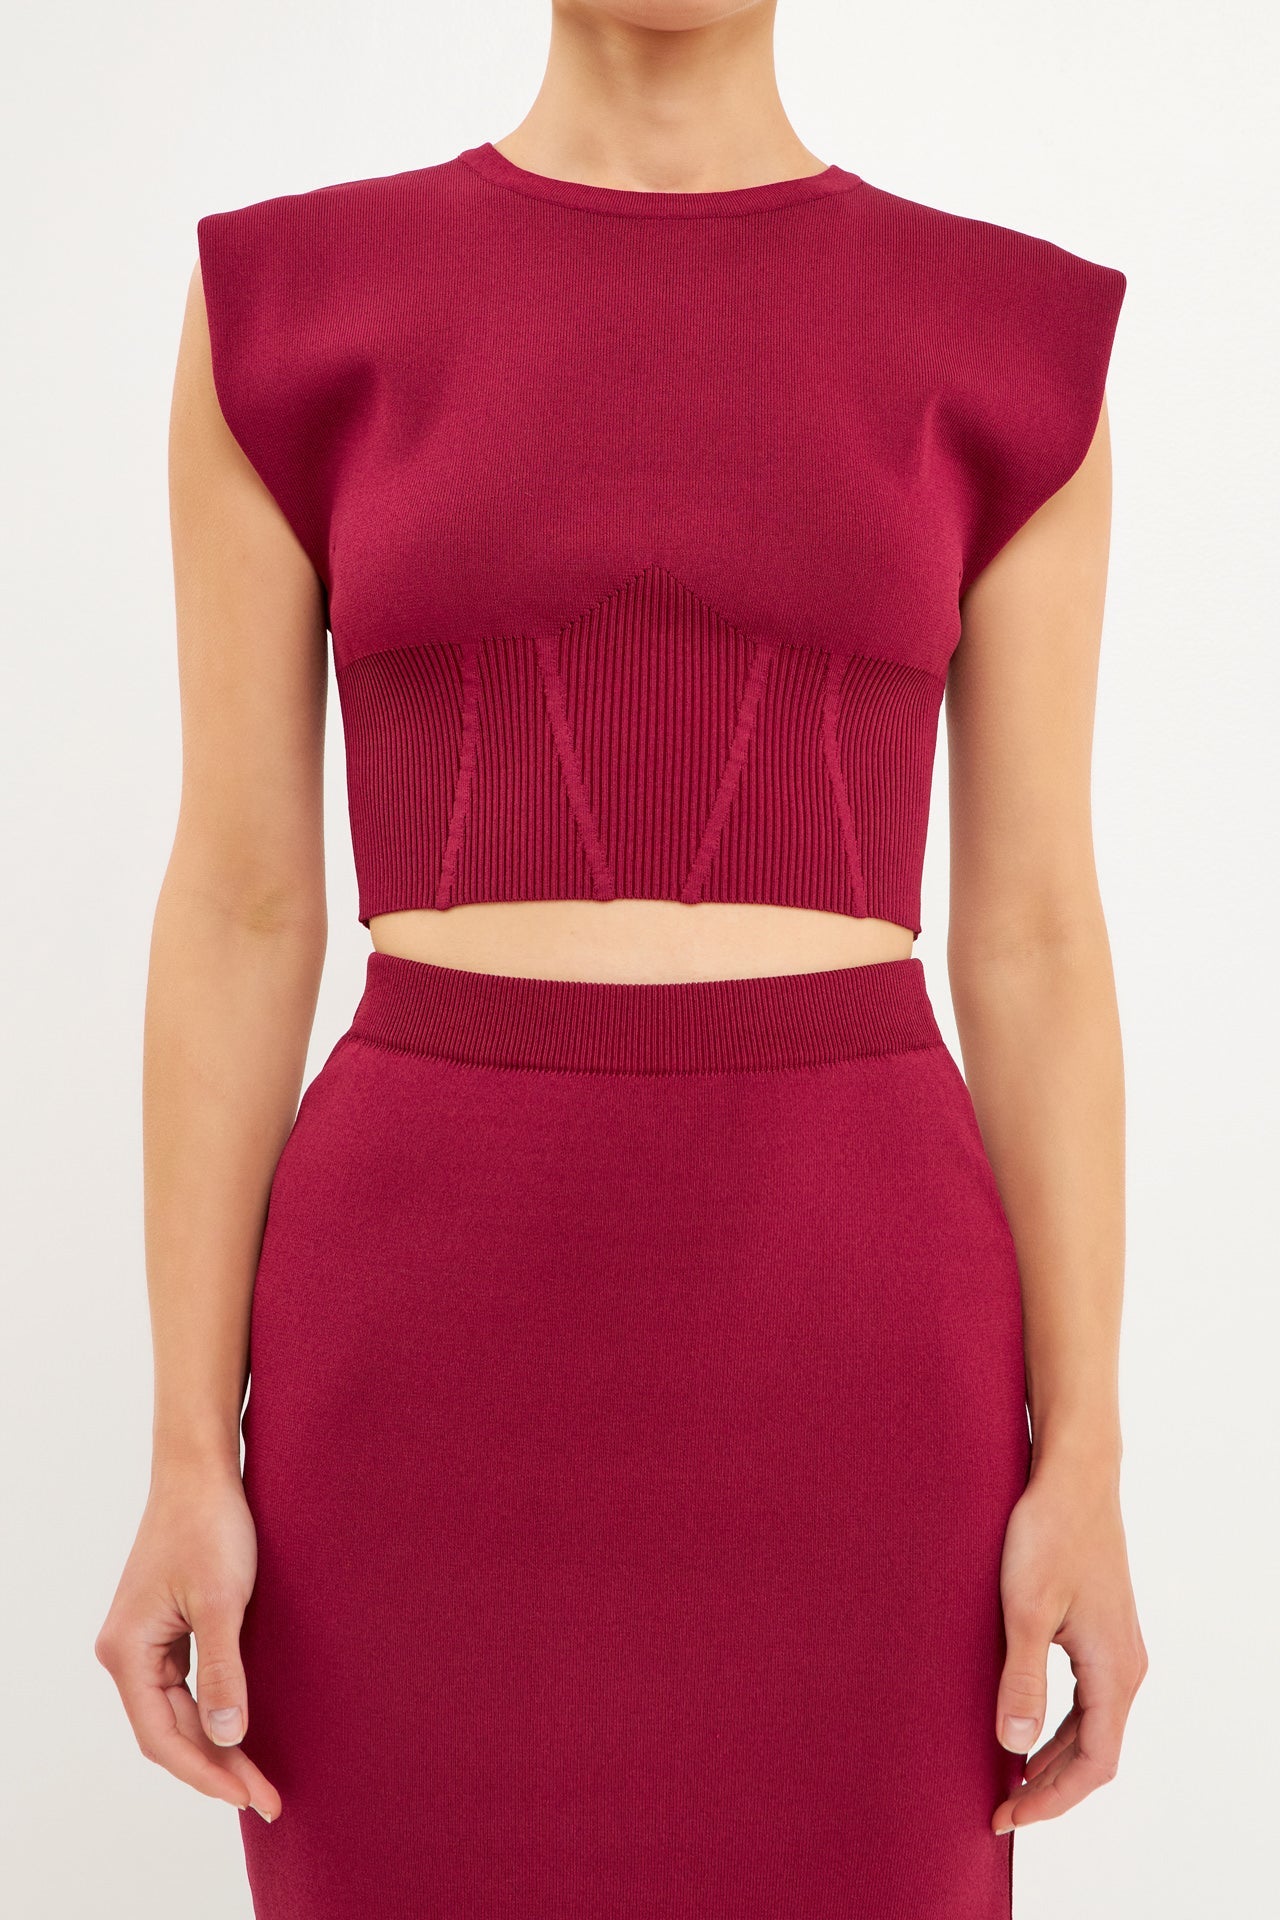 Cinched Waist Sleeveless Knit Top – Endless Rose